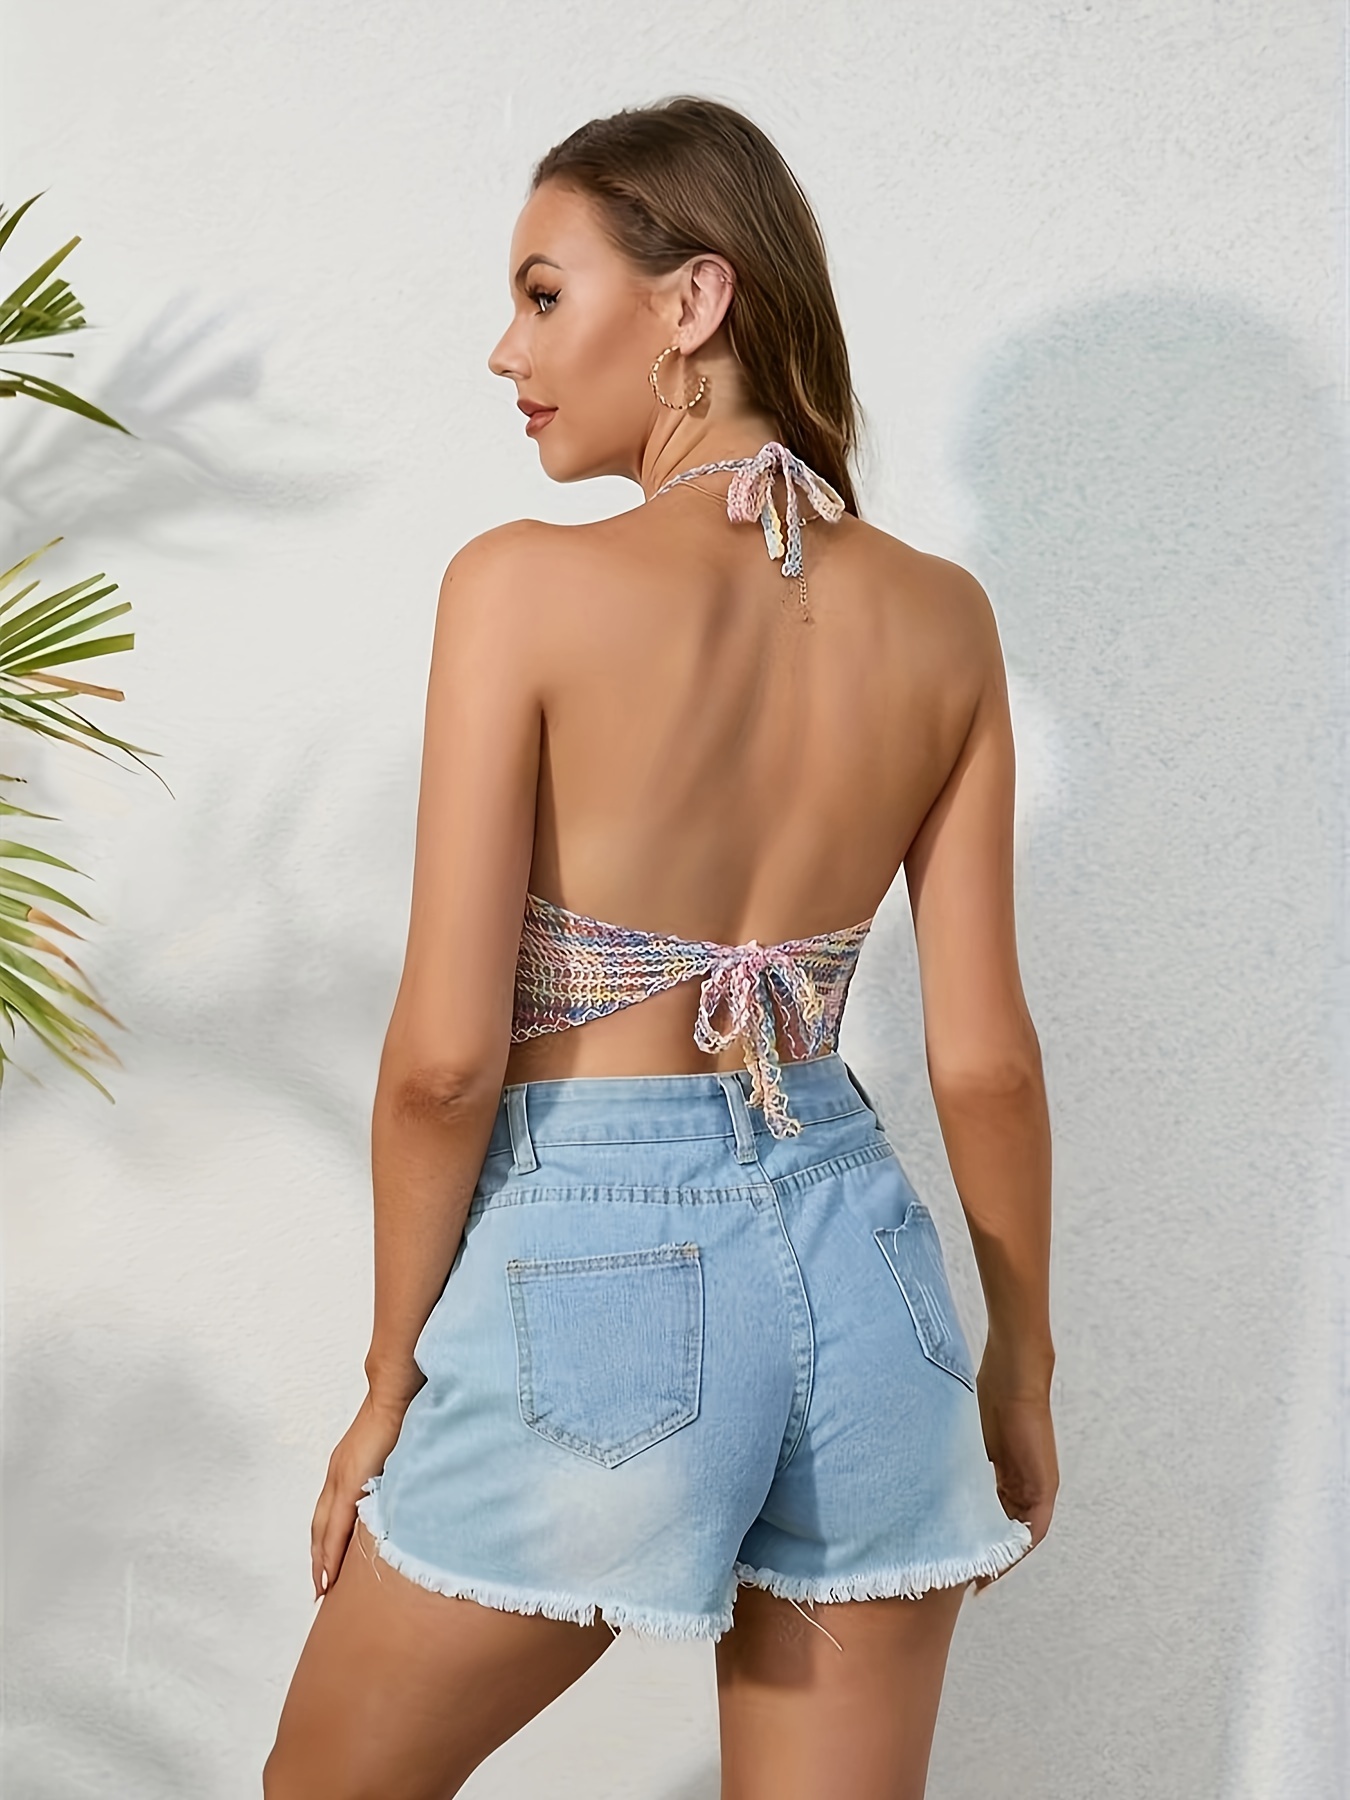 aesthetic outfit backless shirt  Backless top outfit, Fashion outfits, Backless  shirt